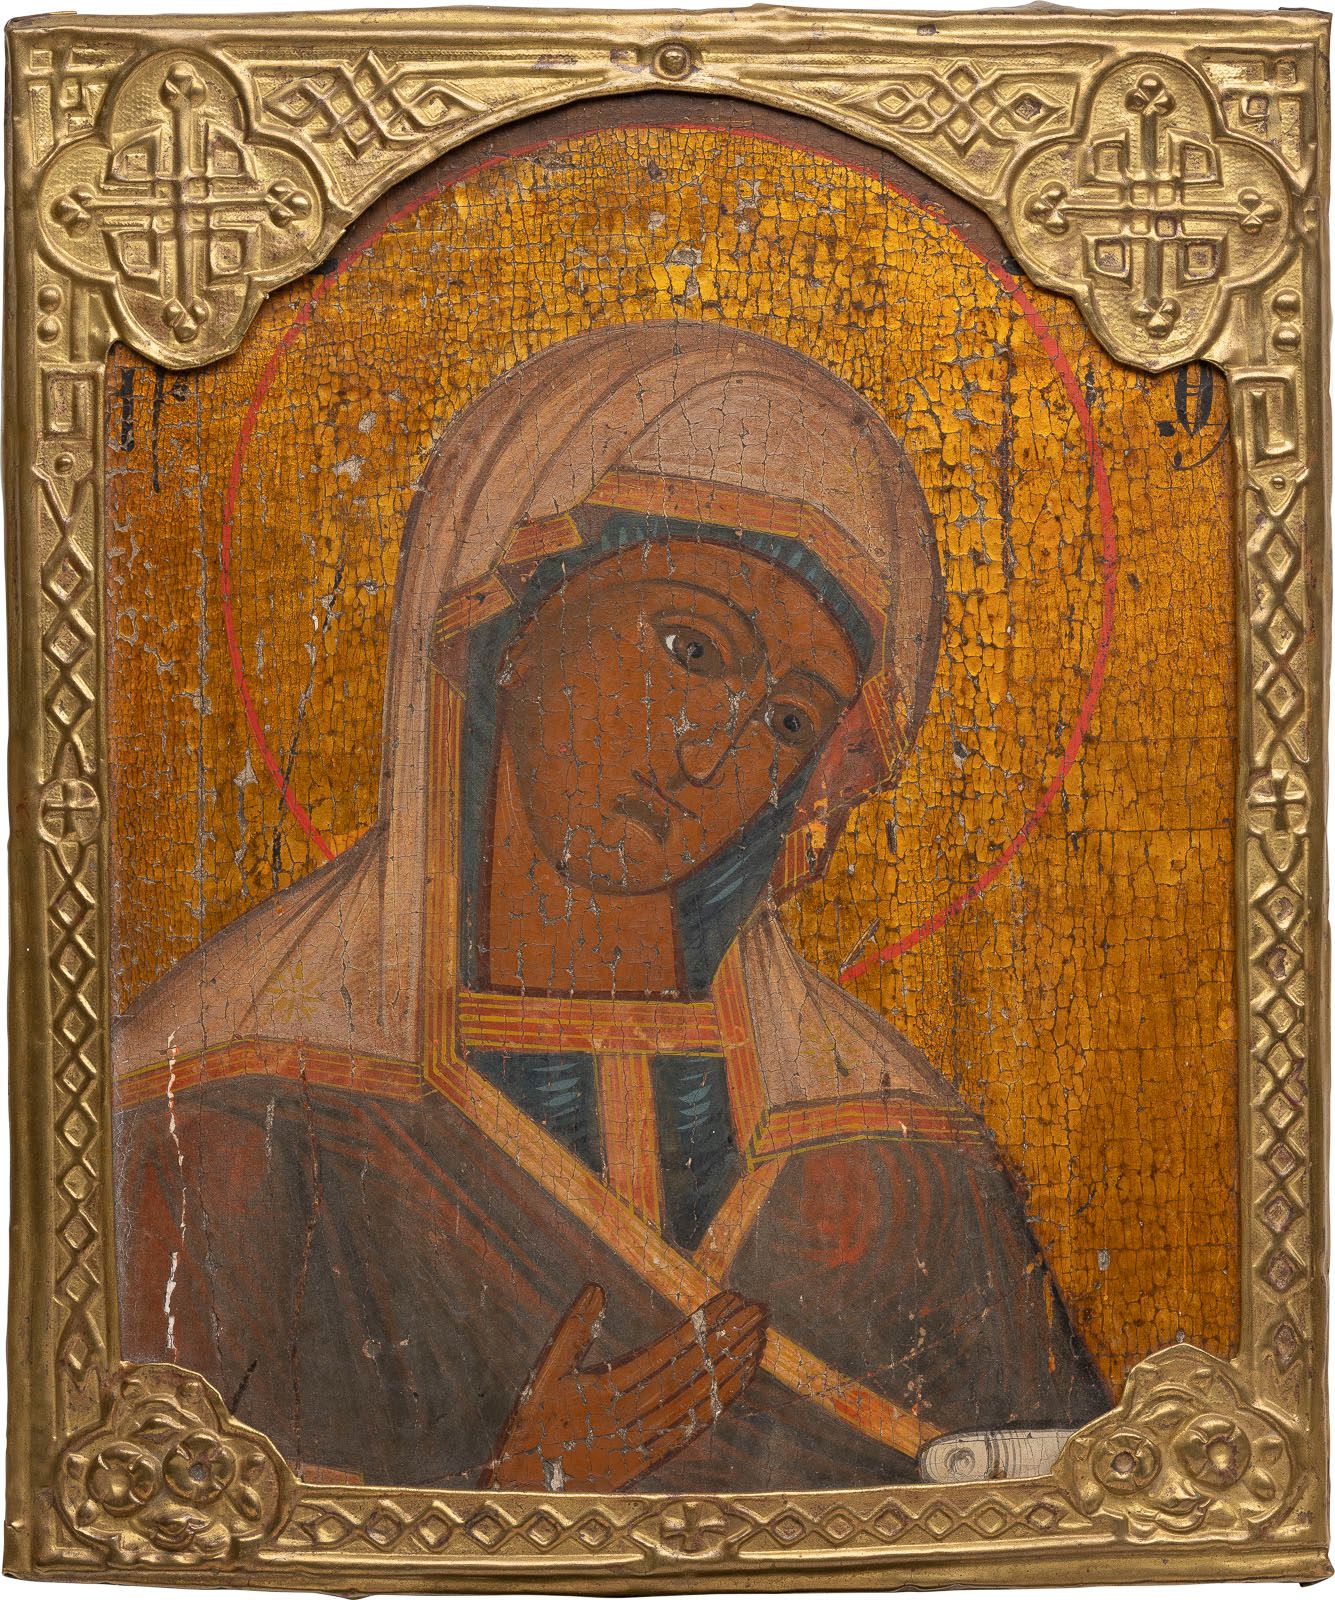 AN ICON SHOWING THE MOTHER OF GOD FROM A DEISIS WITH BASMA IKONE DER GOTTESMUTTE&hellip;